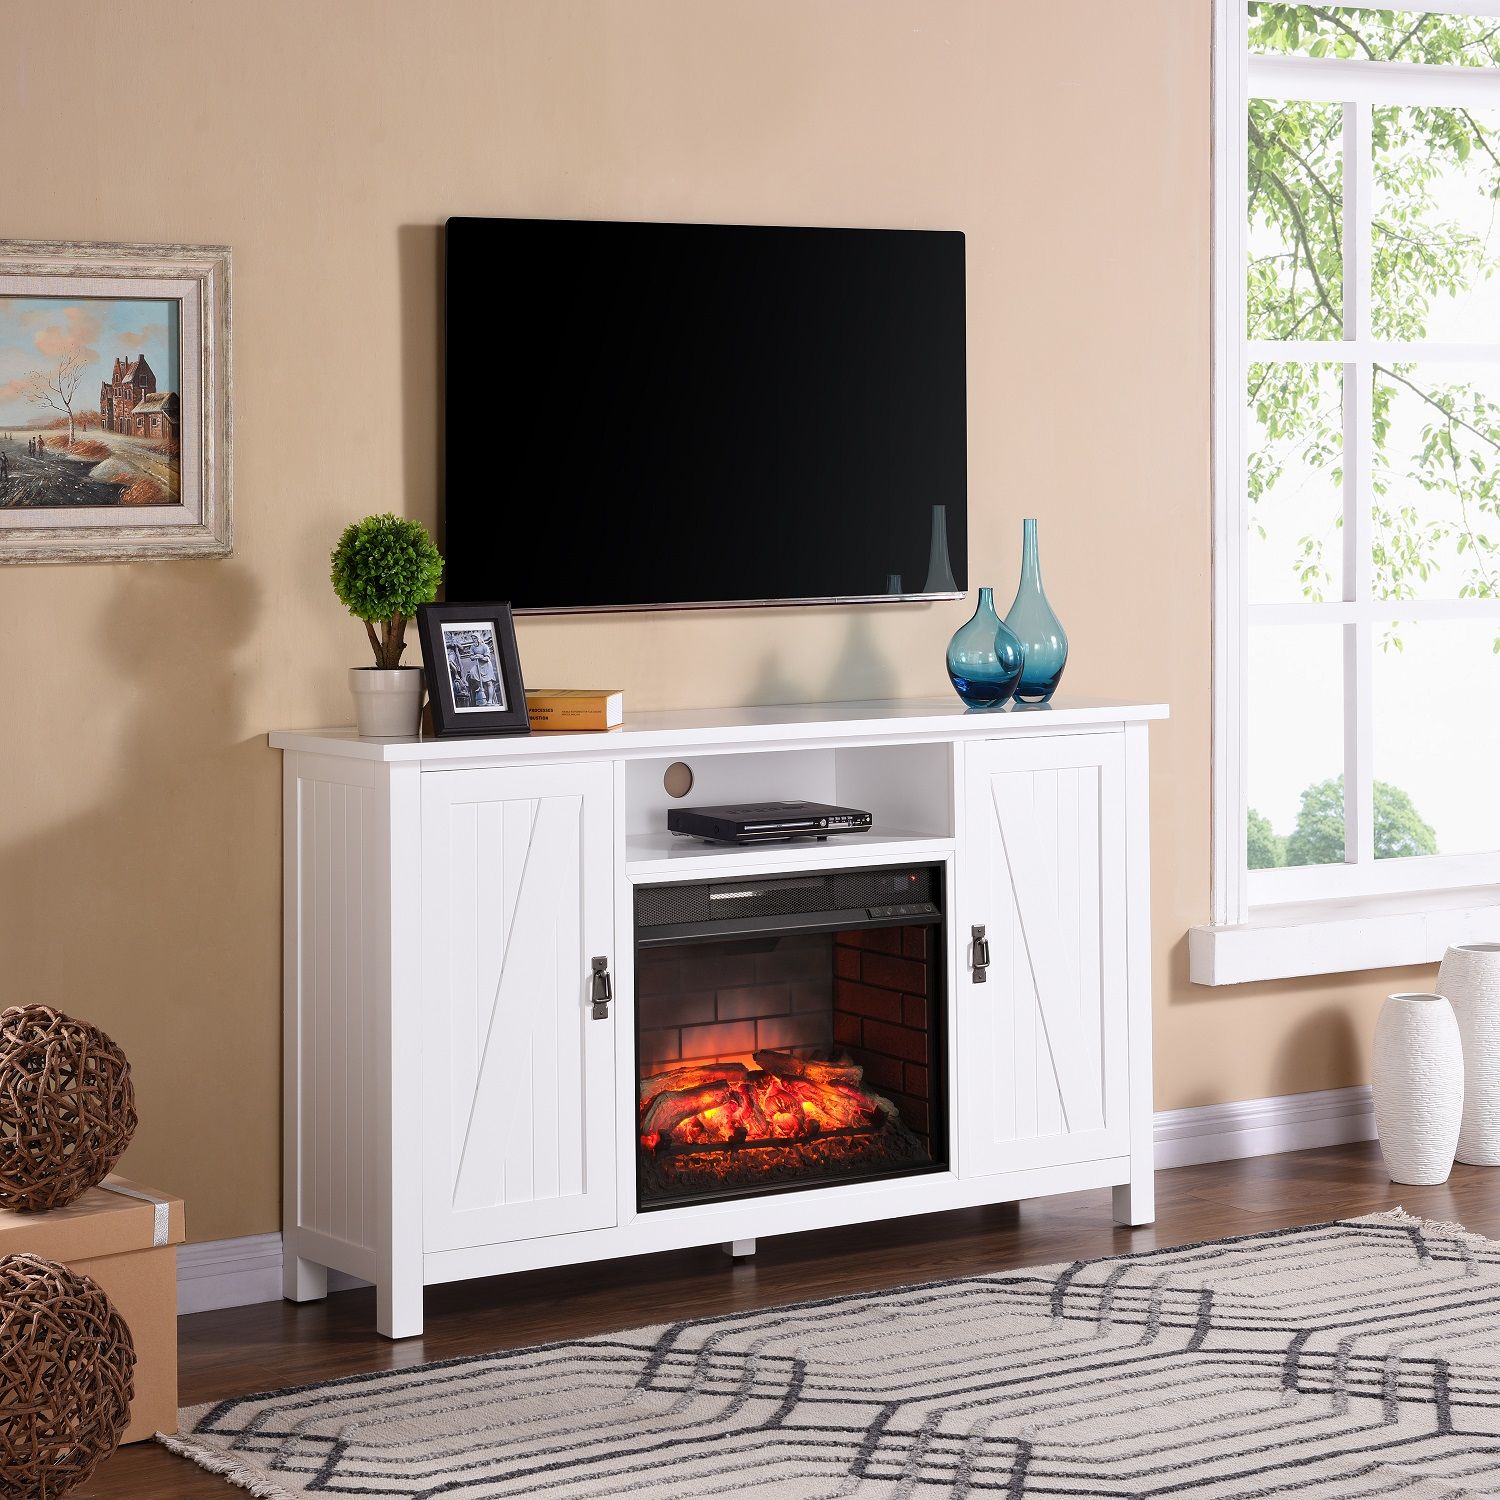 58" Adderly Farmhouse Style Infrared Electric Fireplace Tv Stand – White With Regard To Tv Stands With Electric Fireplace (Gallery 19 of 20)